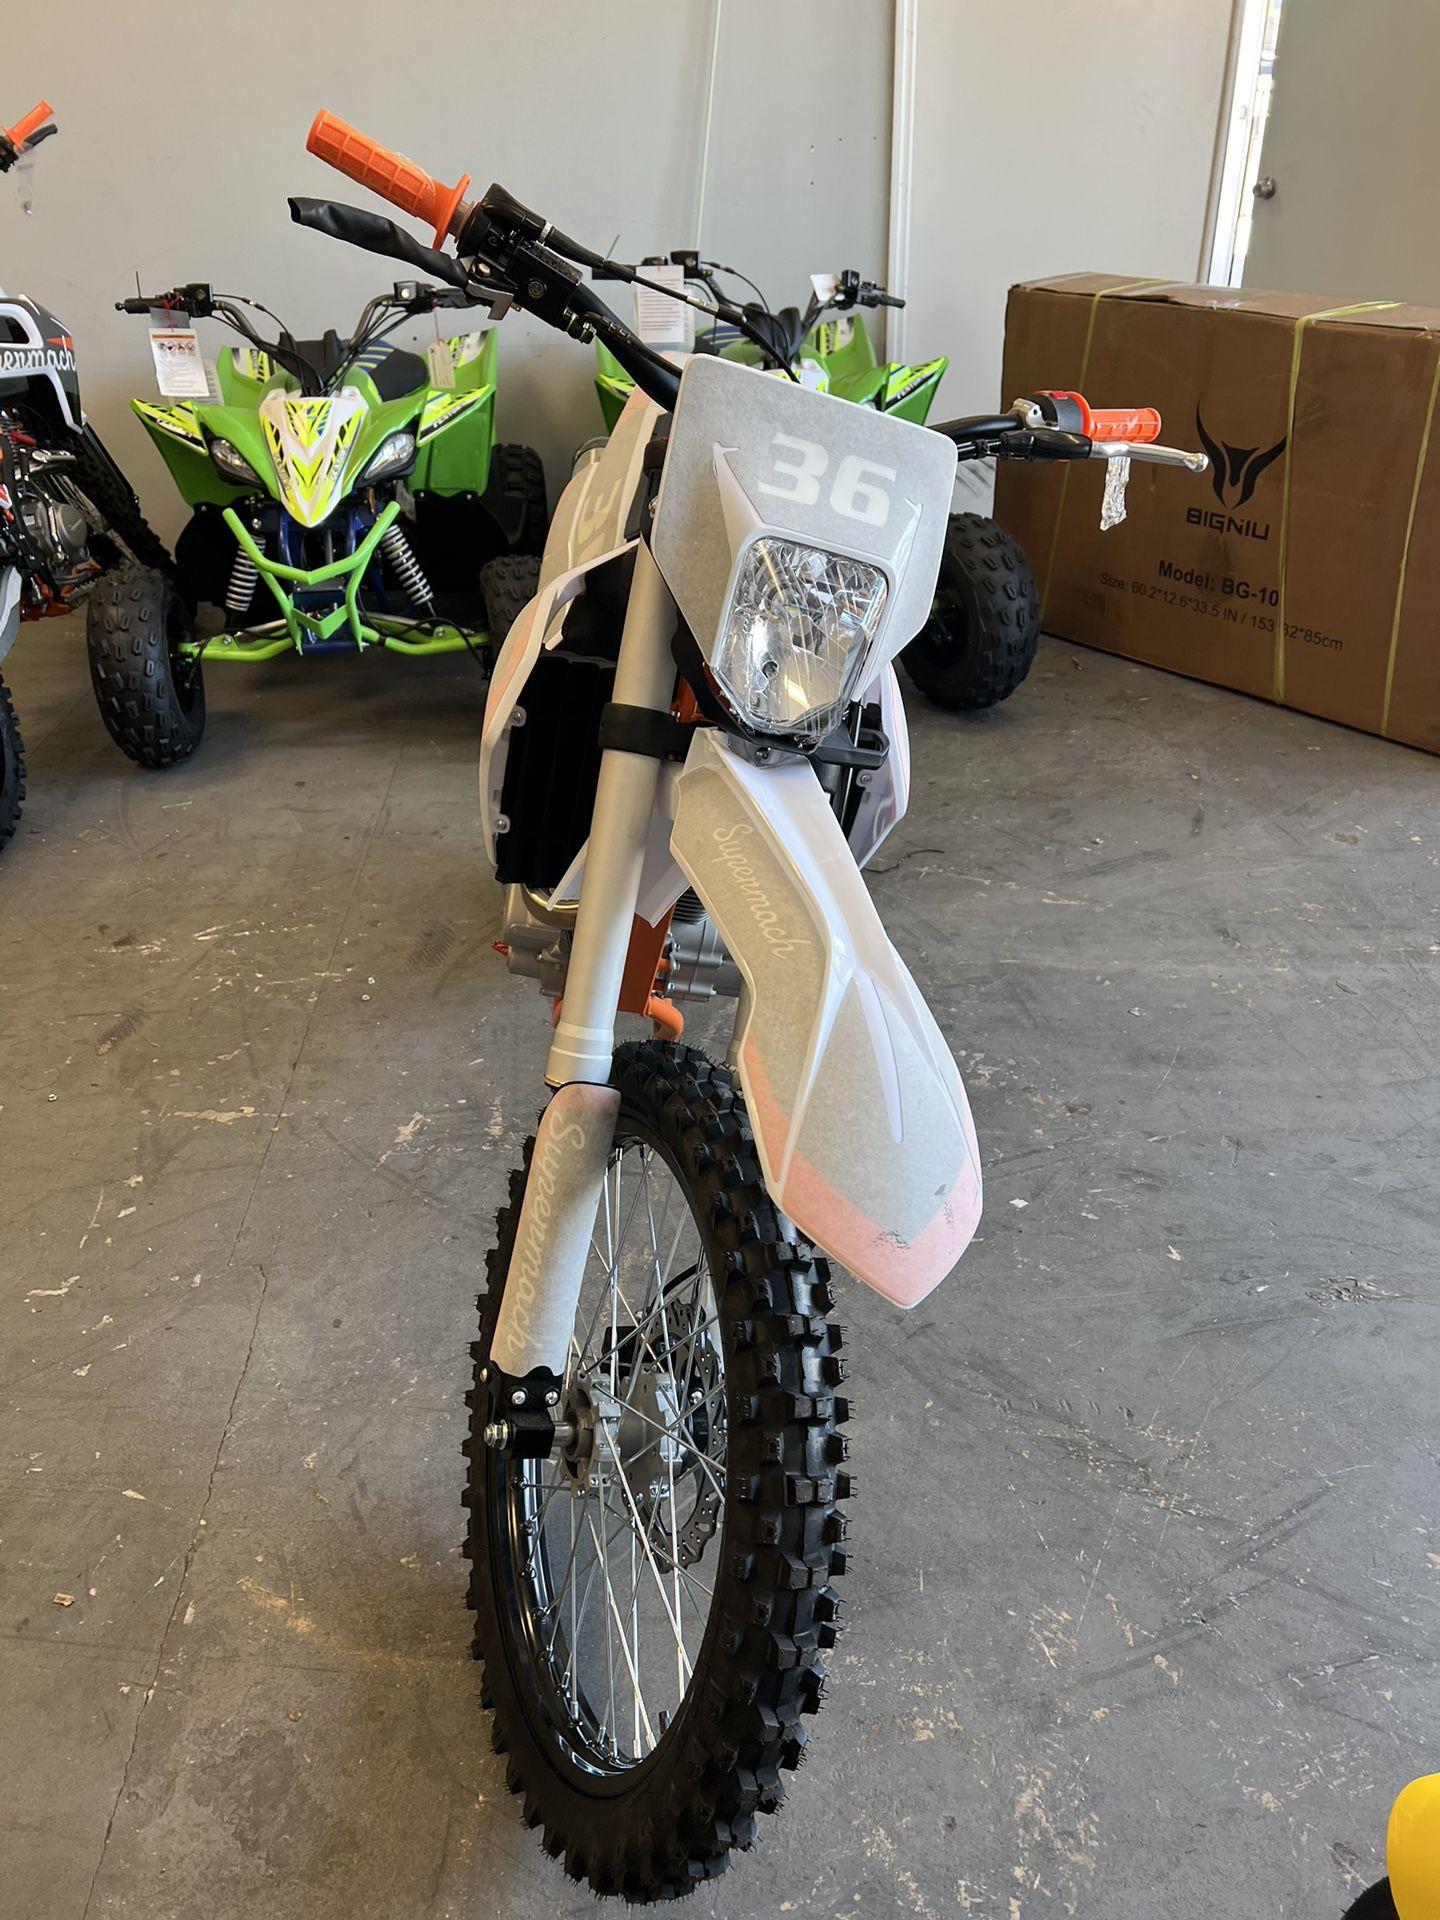 Supermach 250cc Dirt Bike! Finance For $50 Down Payment!!